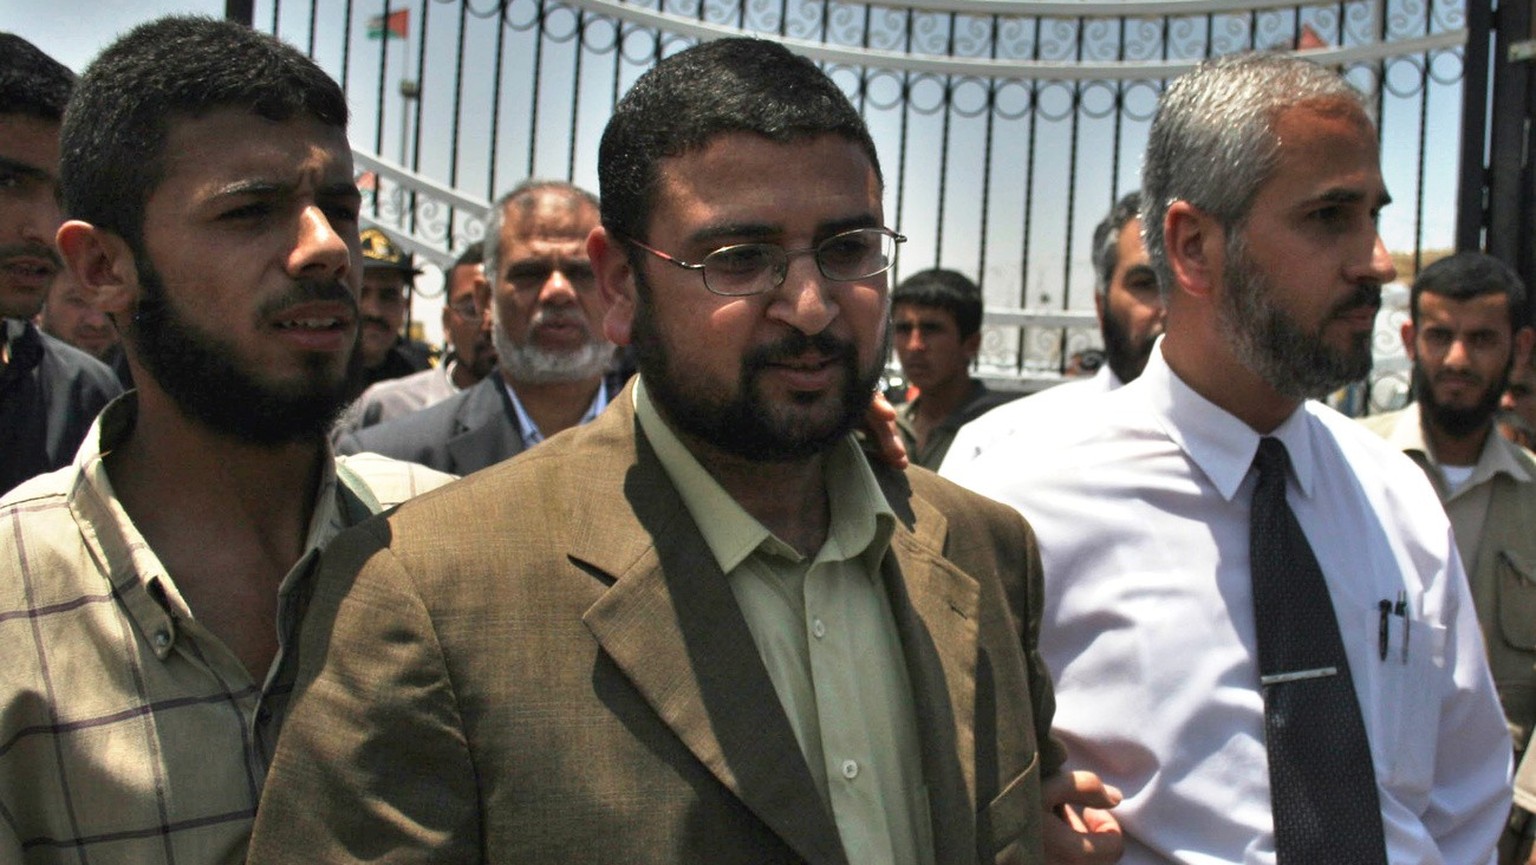 Hamas spokesman Sami Abu Zuhri, center, is escorted out of the terminal of the Rafah border crossing between Egypt and the Gaza Strip Friday, May 19, 2006. Palestinian security forces loyal to Preside ...